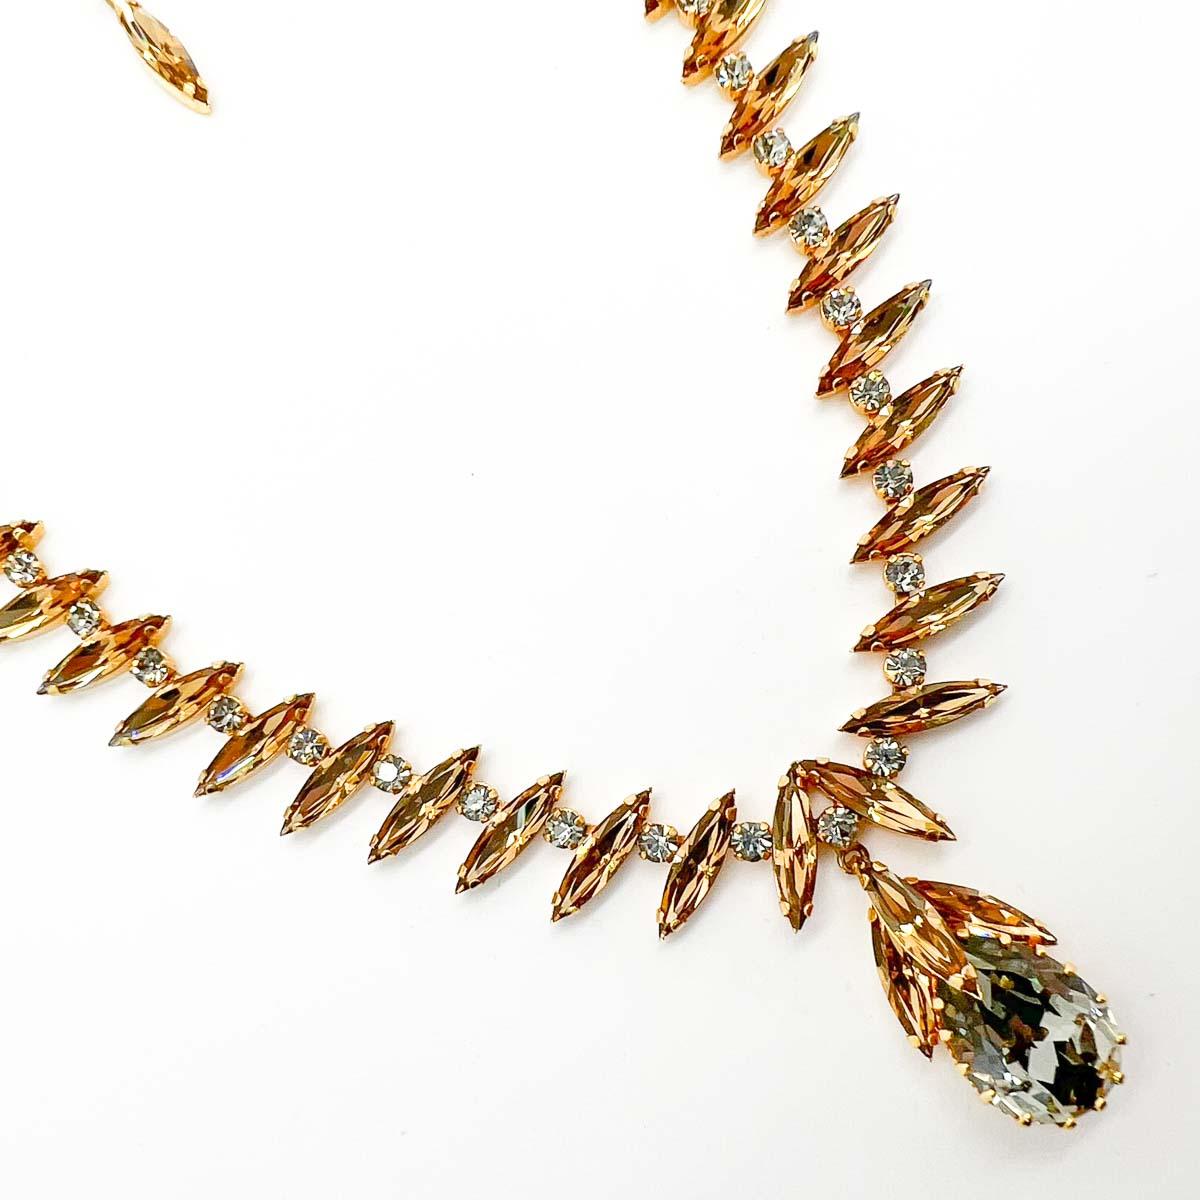 A breathtakingly beautiful Vintage EFBI Austria Droplet Necklace from one of Austria's best mid-century costume jewellery makers. Featuring the most delicate coloured citrine navette crystals, accented with white chatons and finished with a